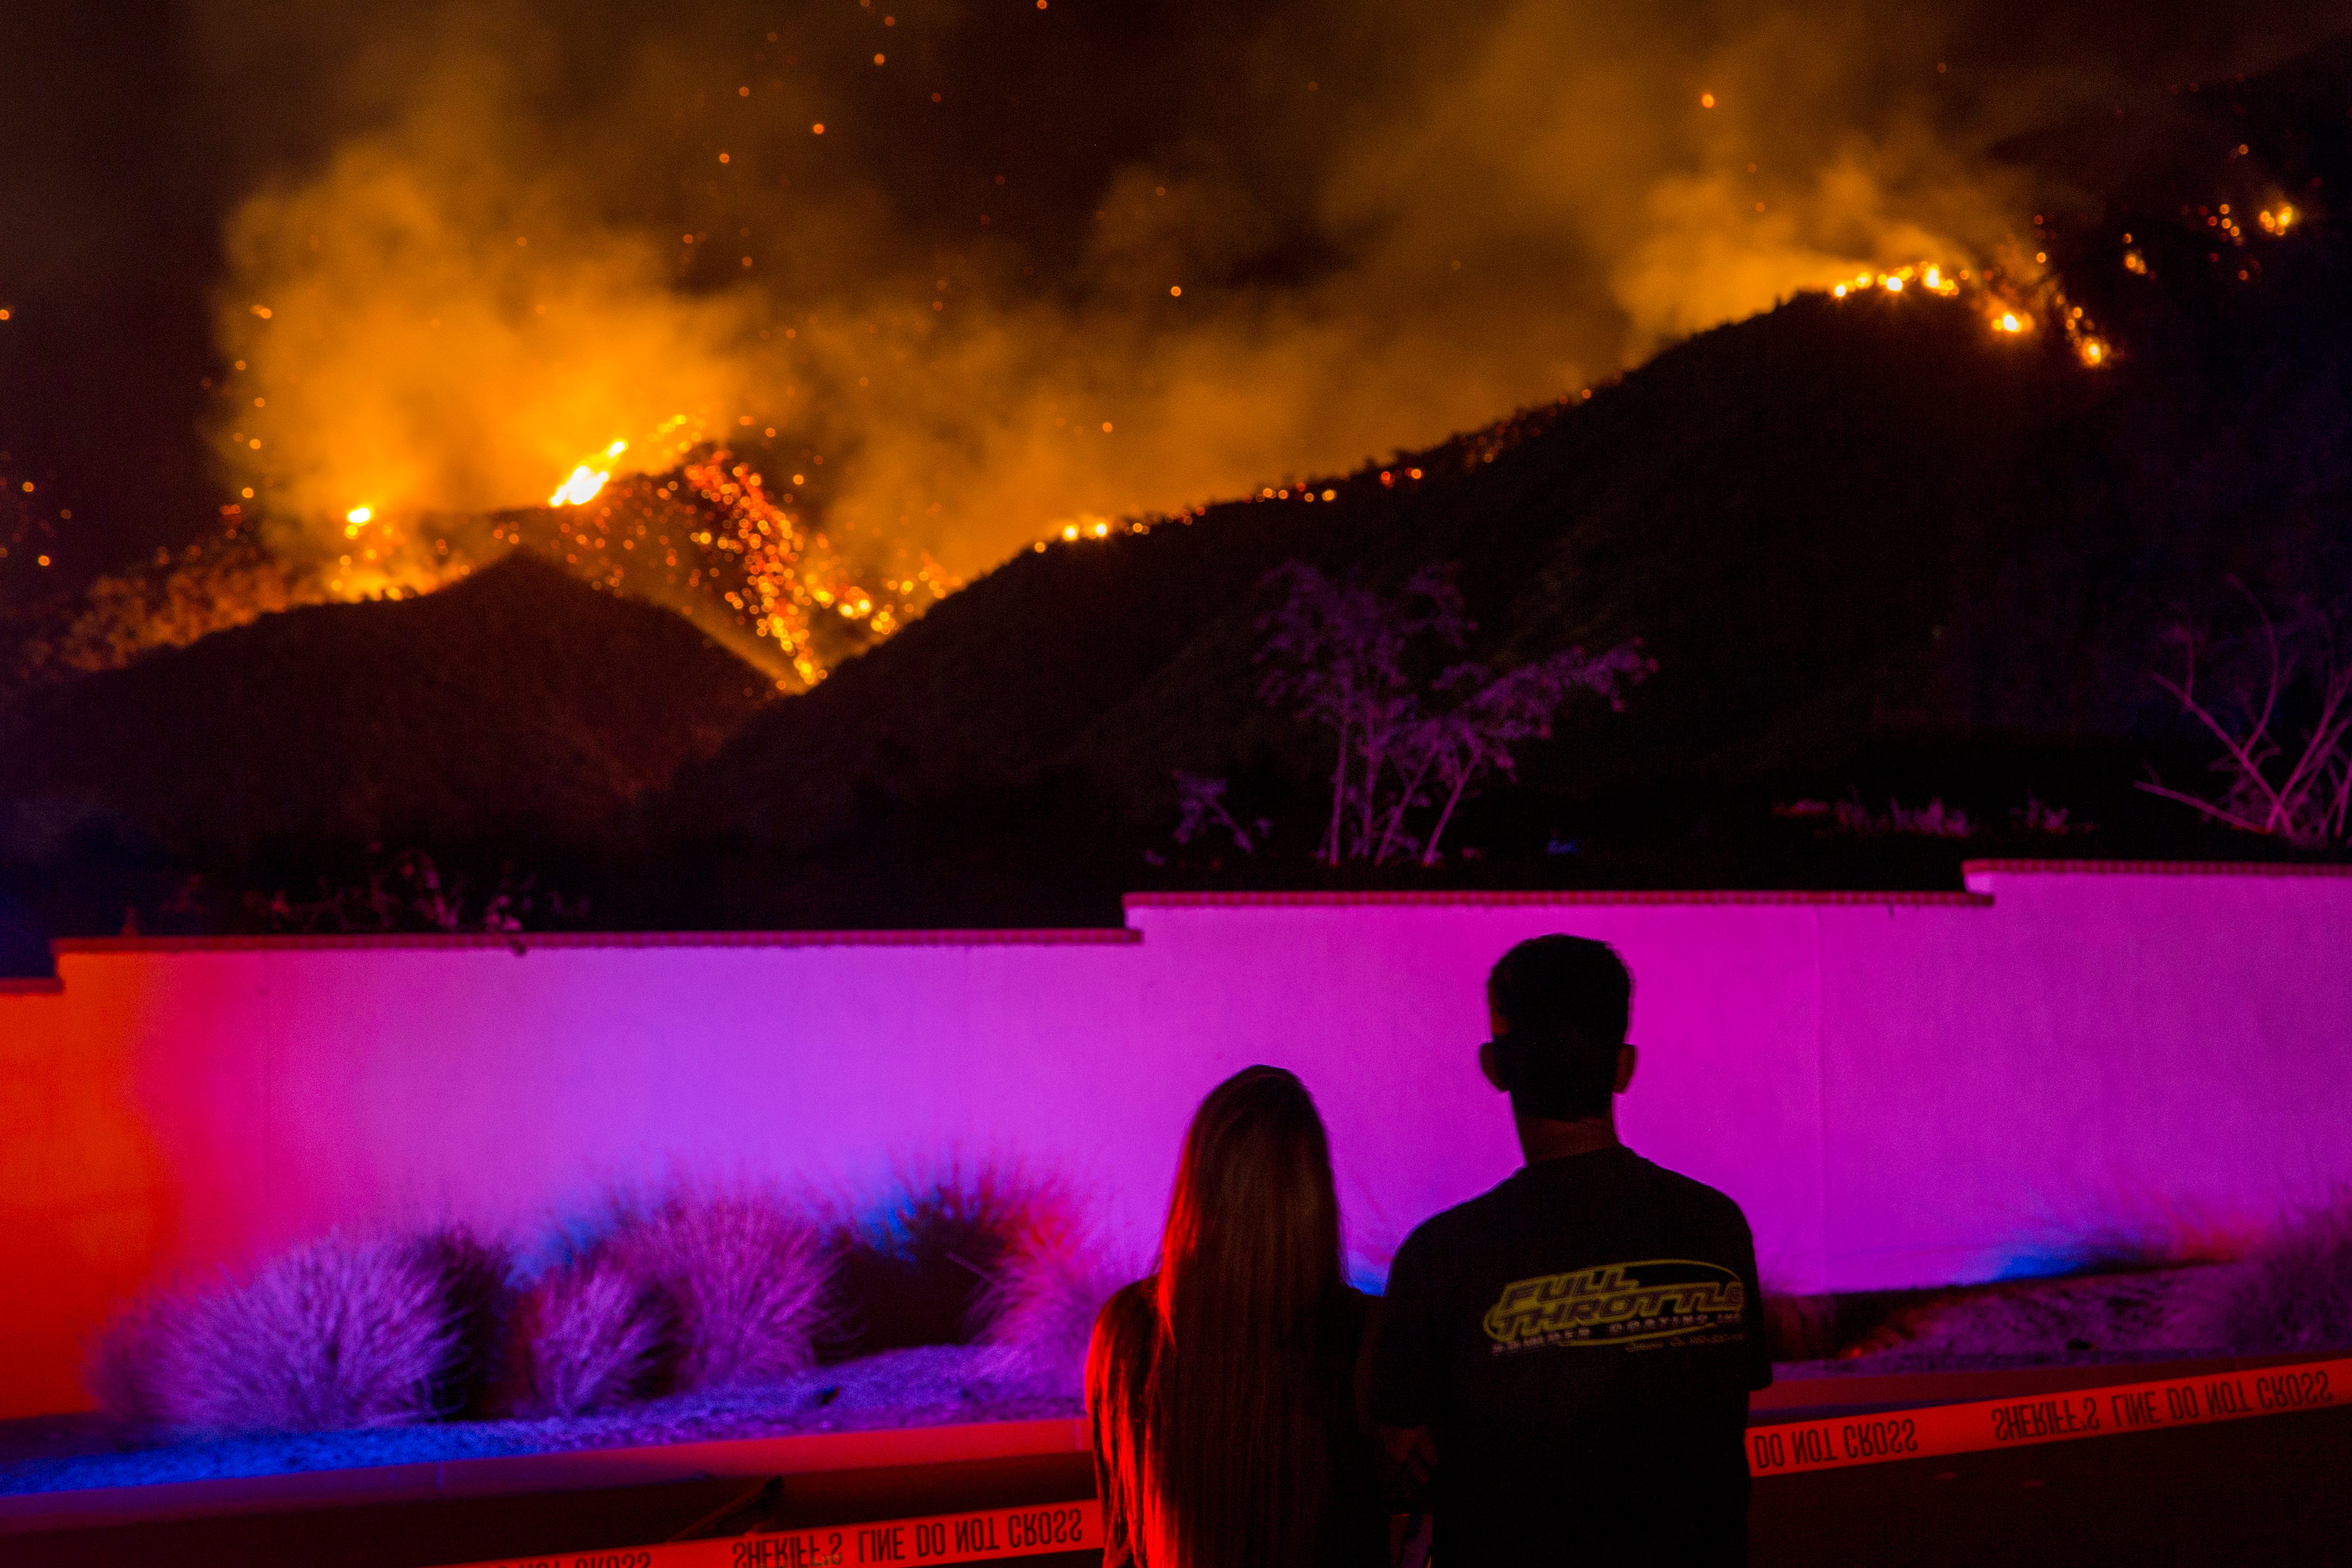 People watch flames near Glen Ivy Hot Springs resort during the Holy Fire in Corona, Calif., Aug. 10, 2018.